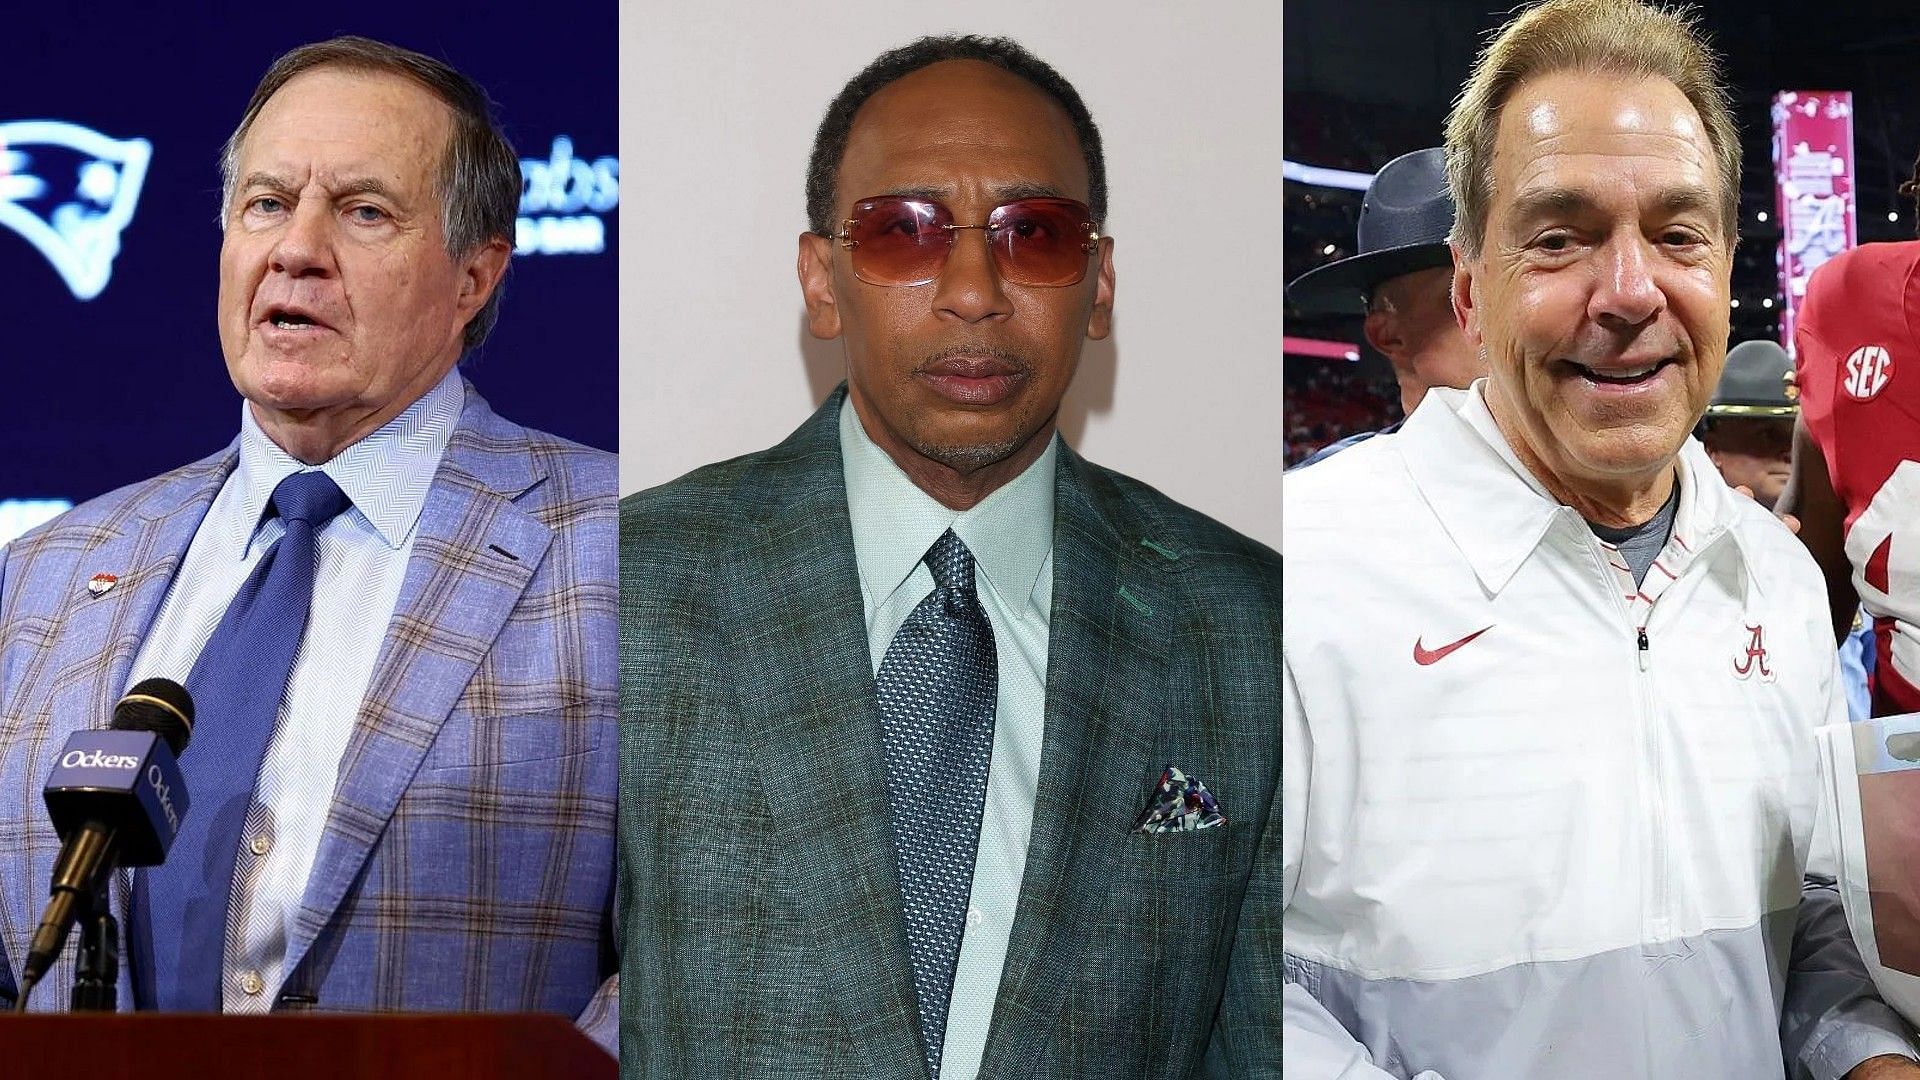 Stephen A. Smith claims Bill Belichick is being forced out unlike Nick Saban